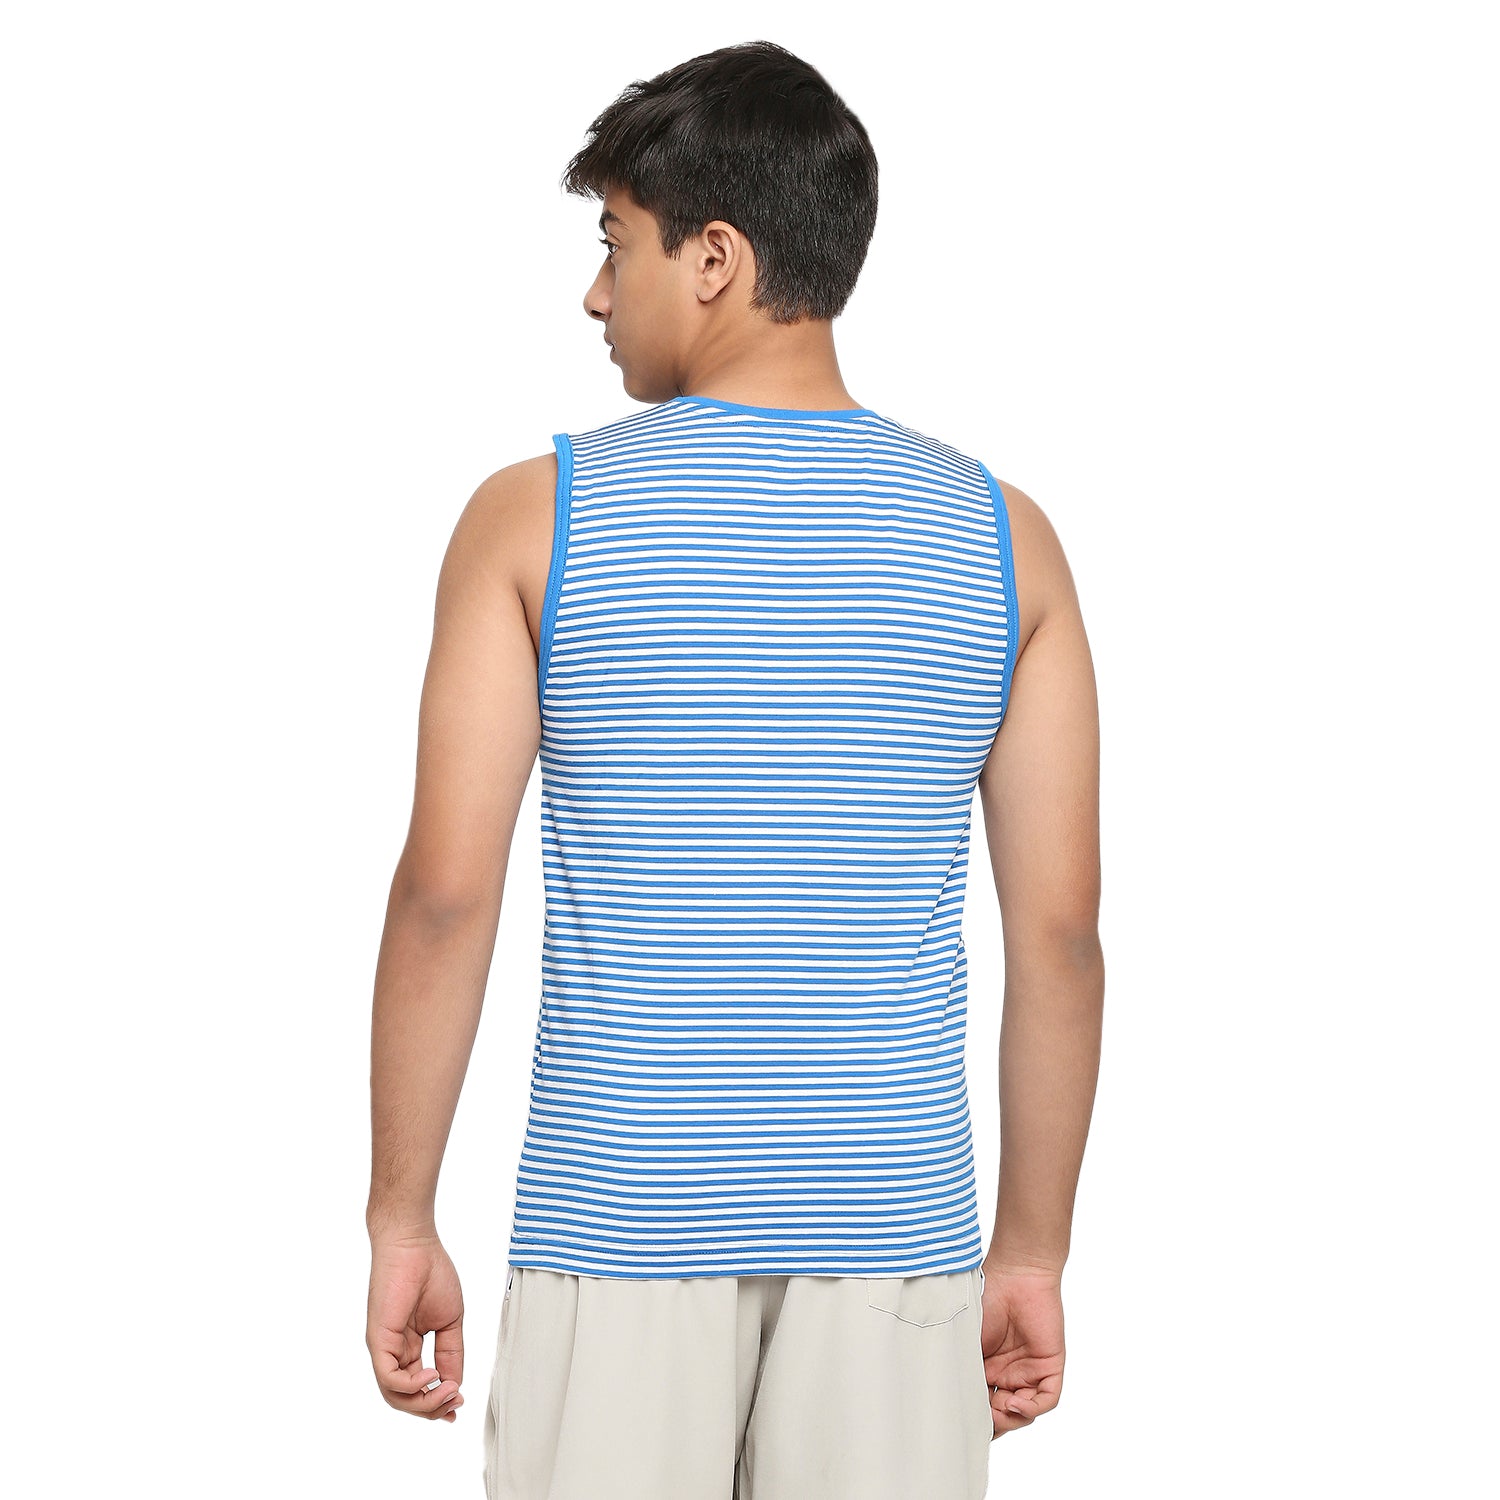 Frenchie U-19 Teens Blue Striped Vest made in Cotton Lycra Fabric